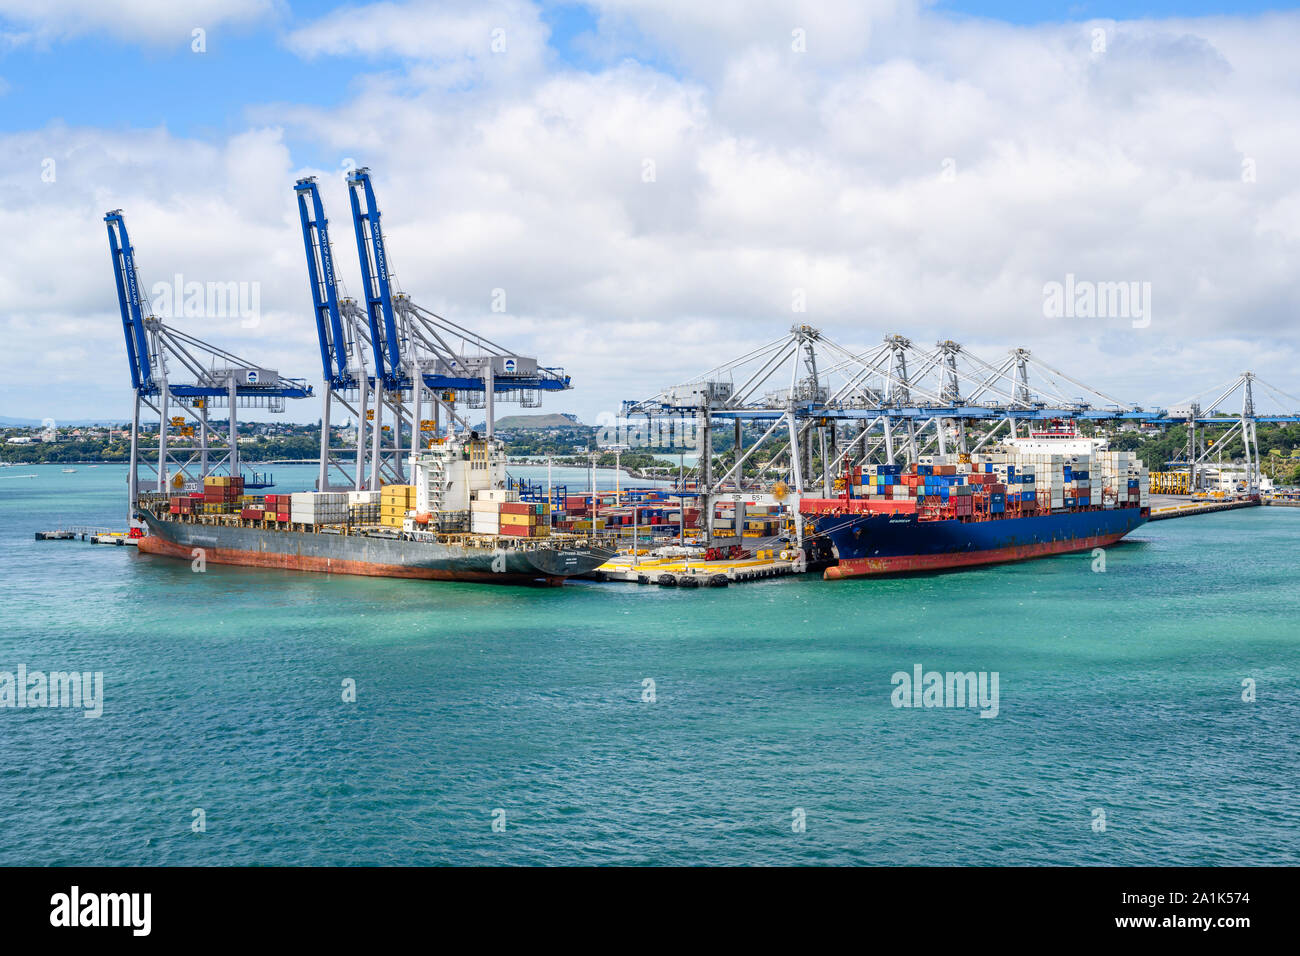 Fergusson Container Terminal, Ports of Auckland, New Zealand. Stock Photo